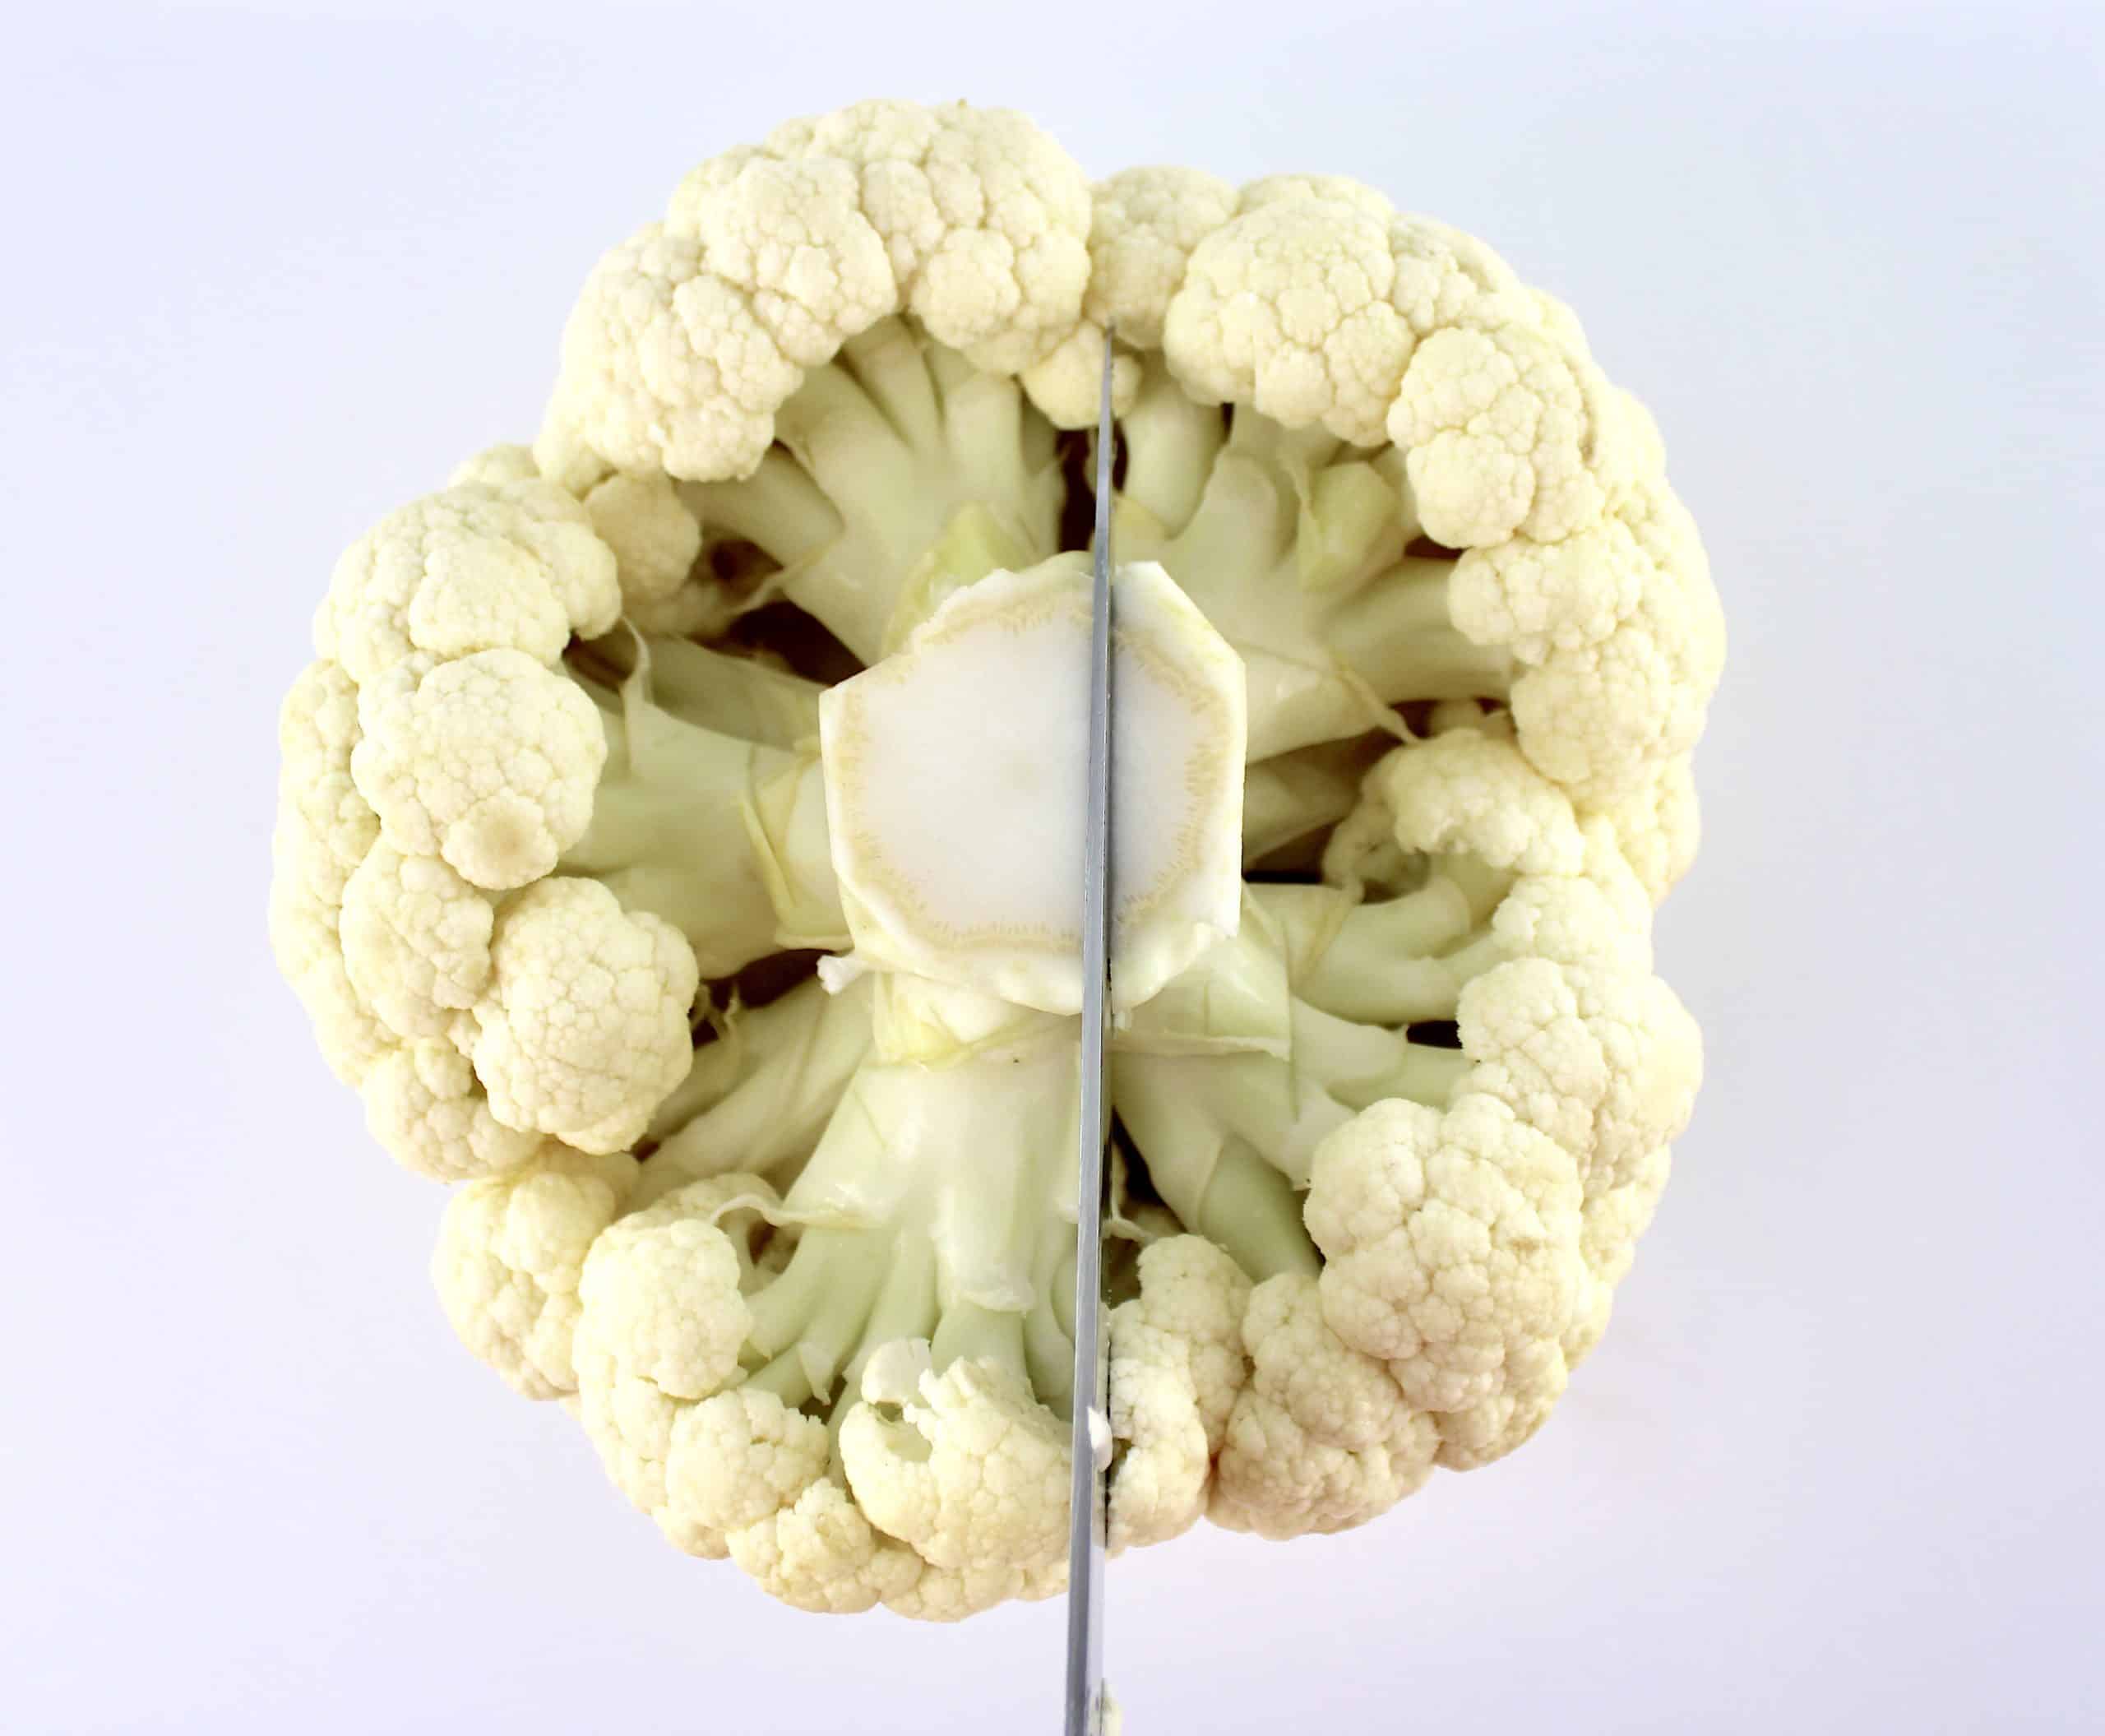 head of cauliflower being cut from the stem down